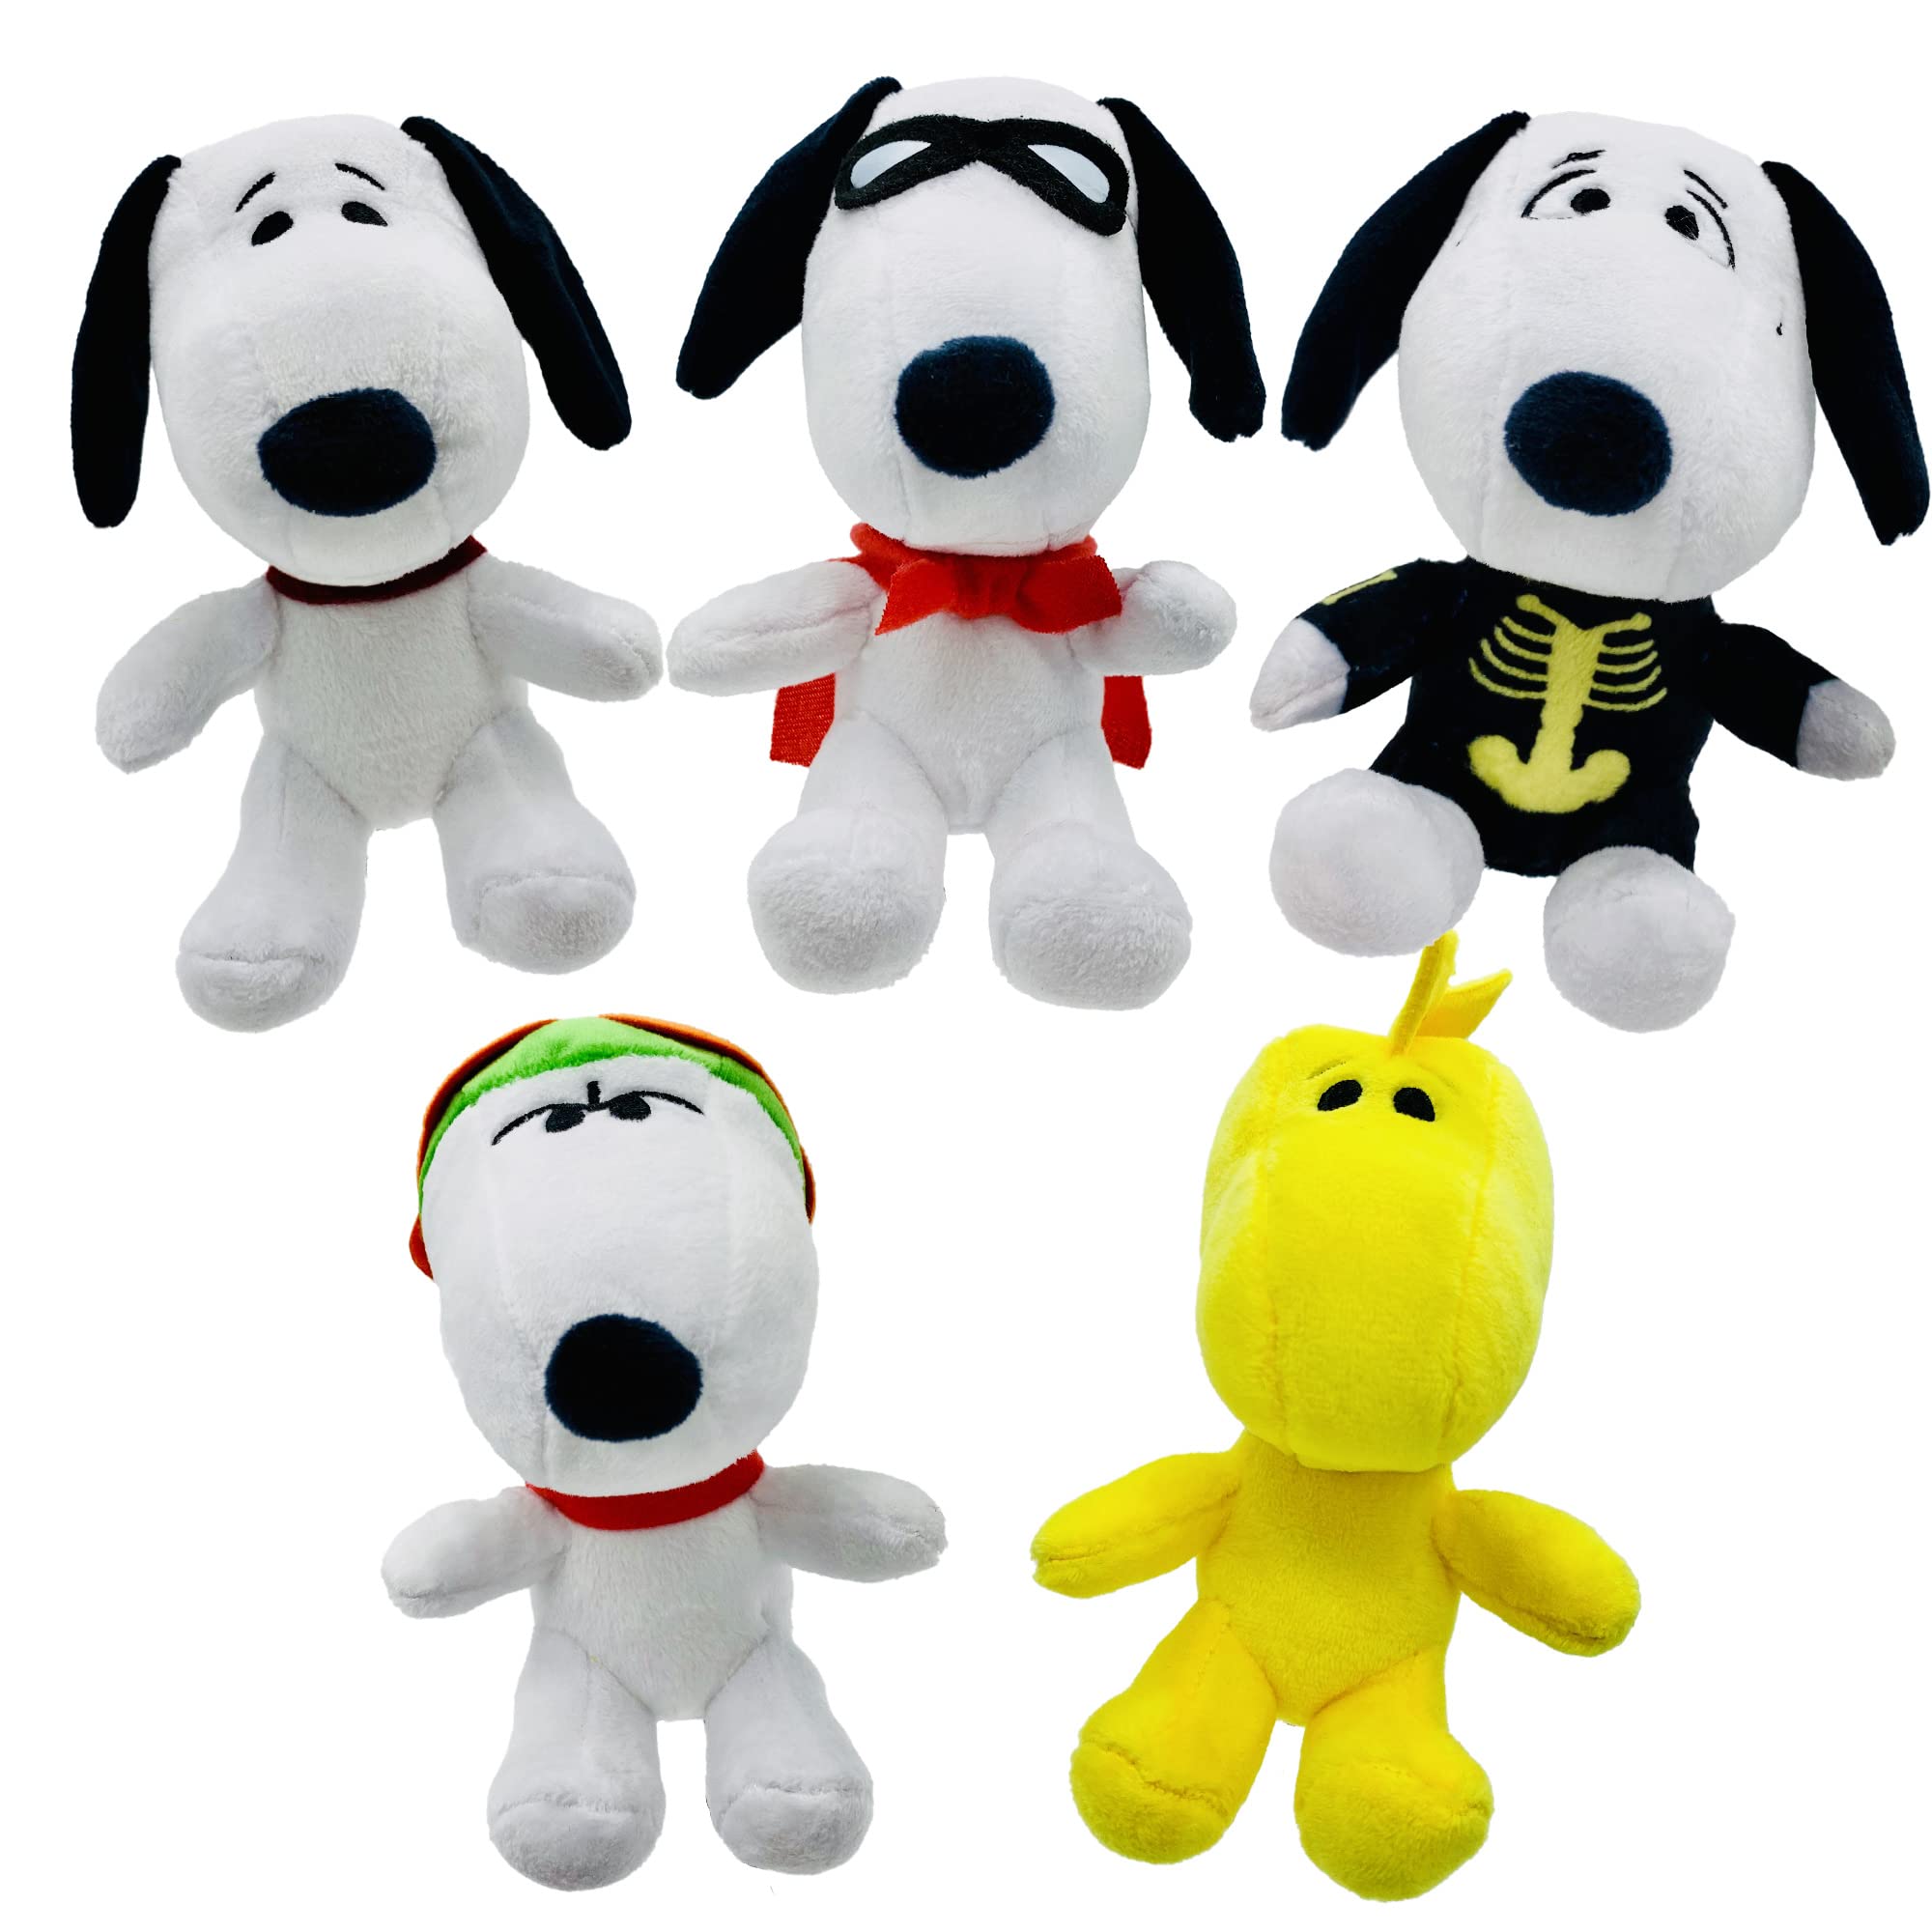 JINX Official Peanuts Collectible Plush Snoopy, Excellent Plushie Toy for Toddlers & Preschool, Super Cute Flying Ace